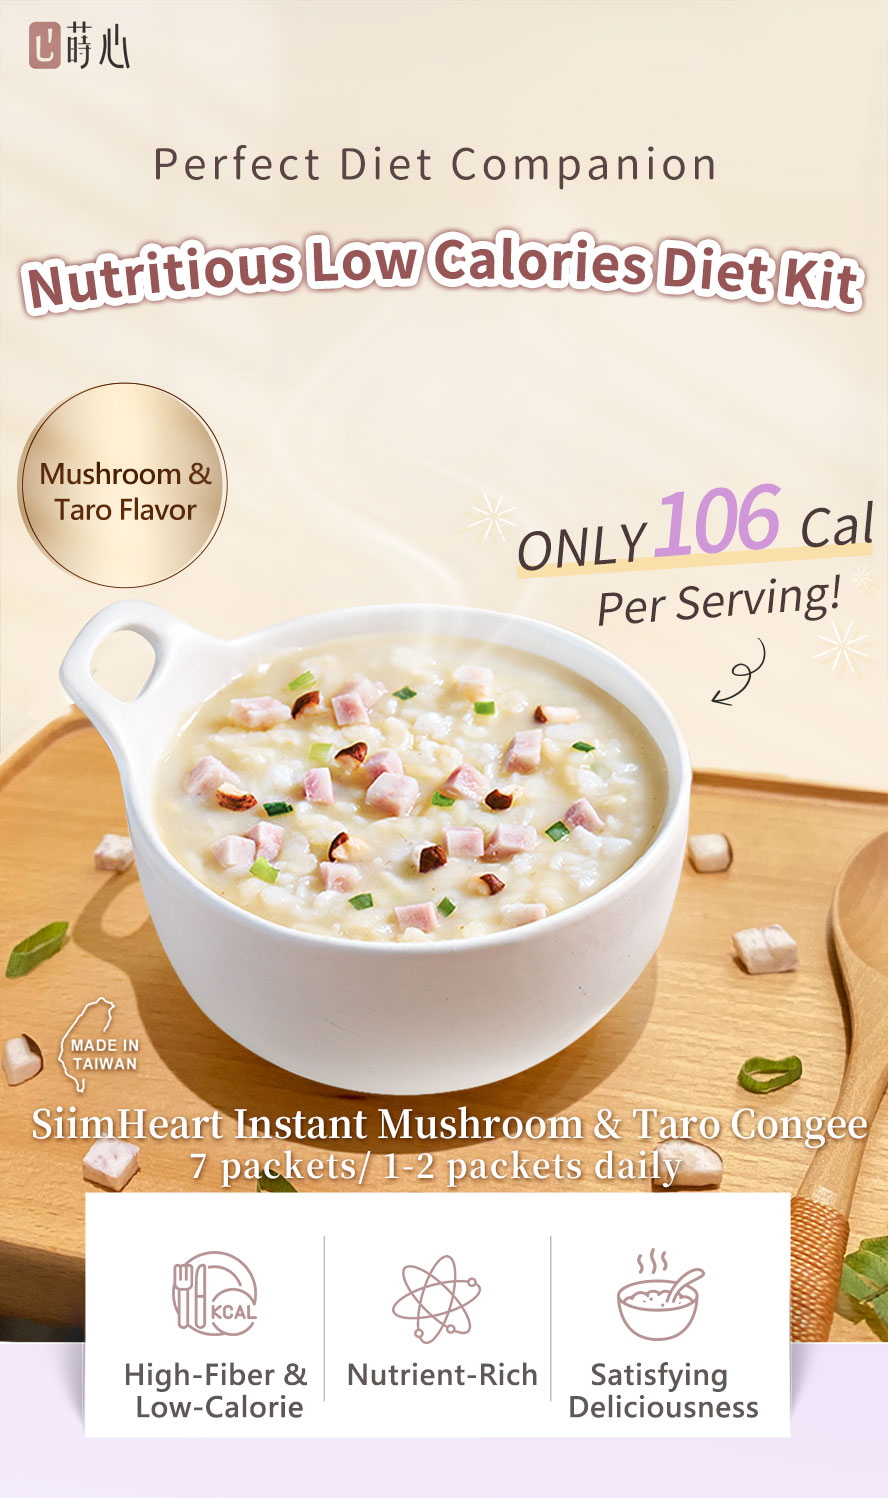 SiimHeart Instant Mushroom & Taro Congee is a nutritious low calorie diet kit.